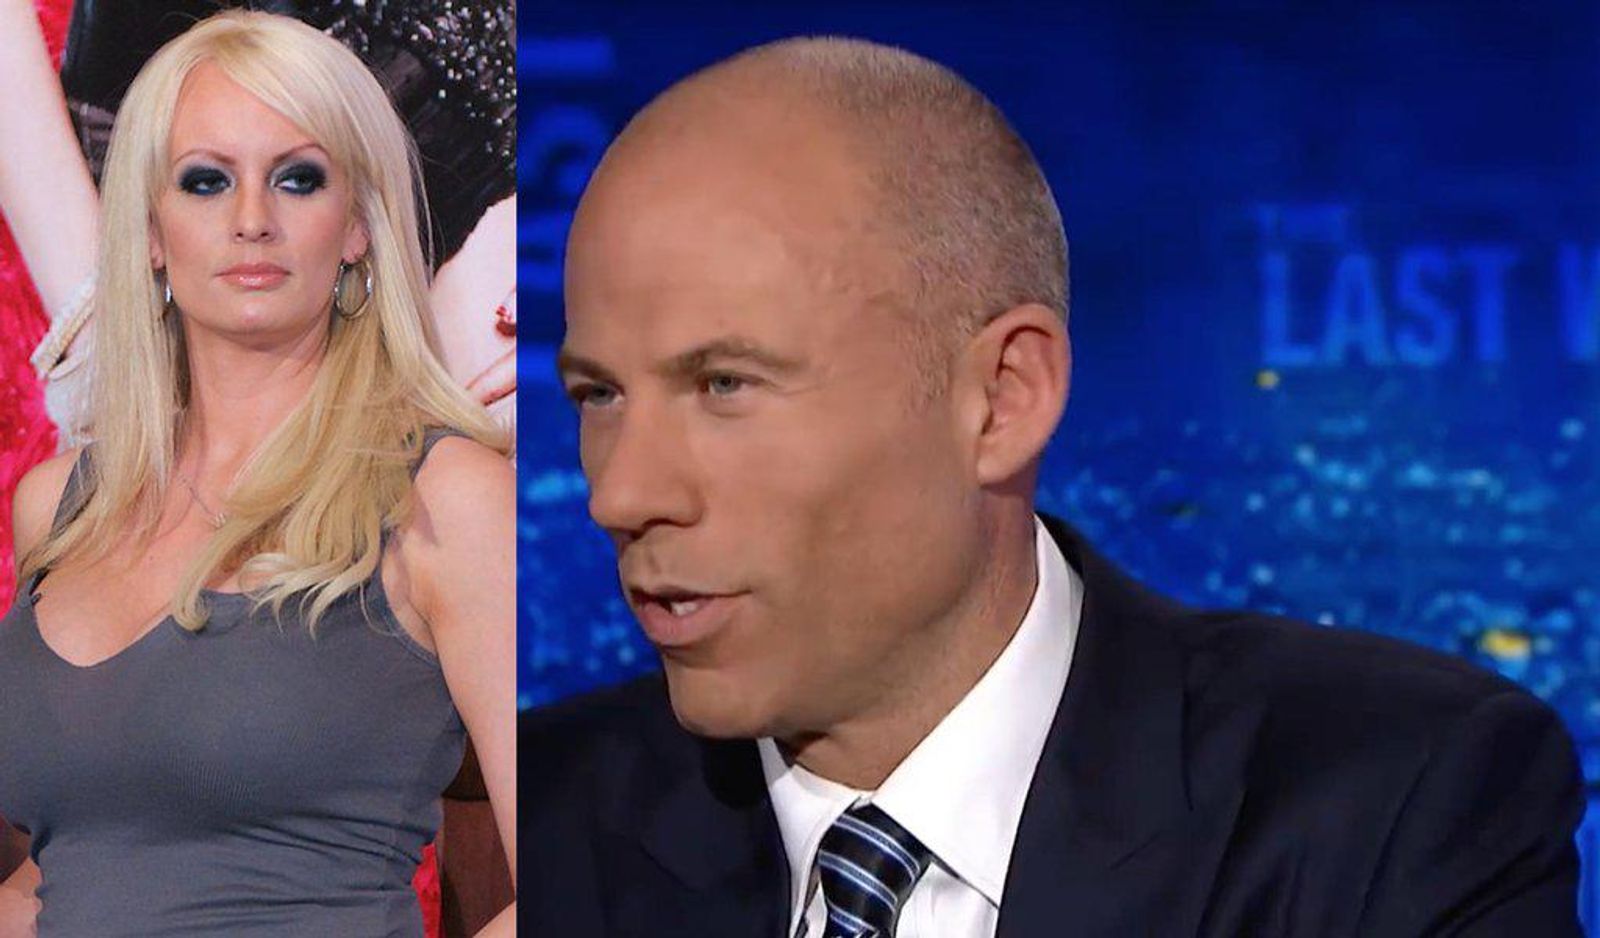 Stormy's Attorney's Firm Ordered to Pay $10 Million Judgment